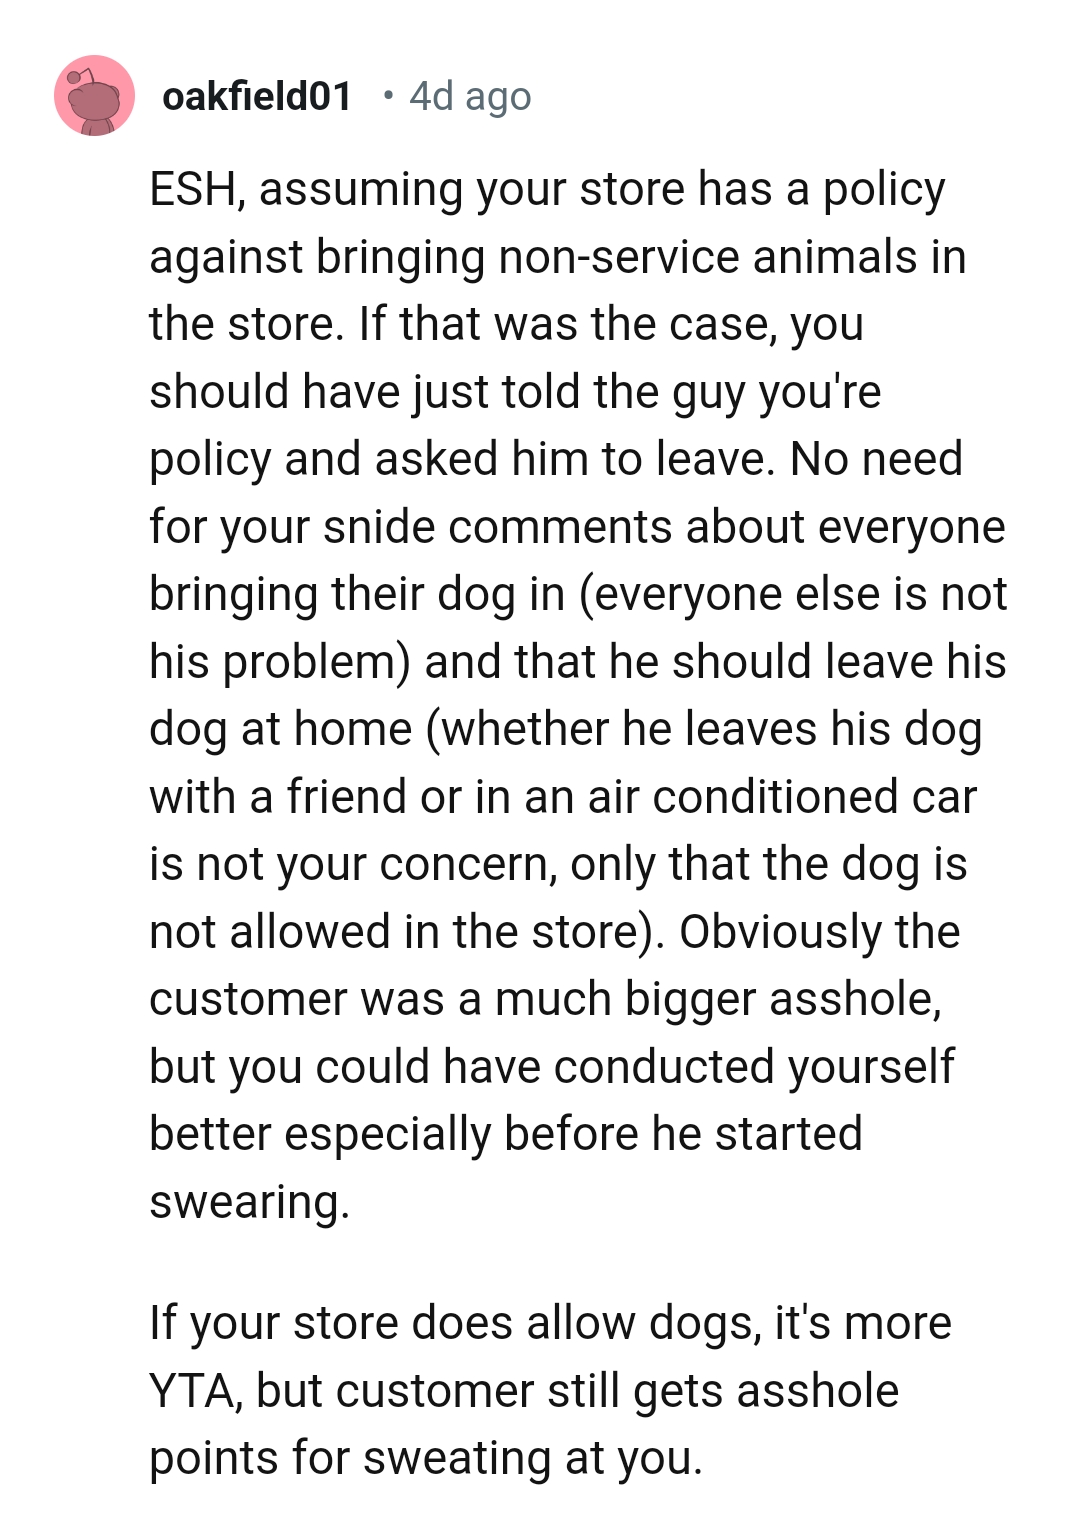 No need for the OP's snide comments about people bringing their dogs